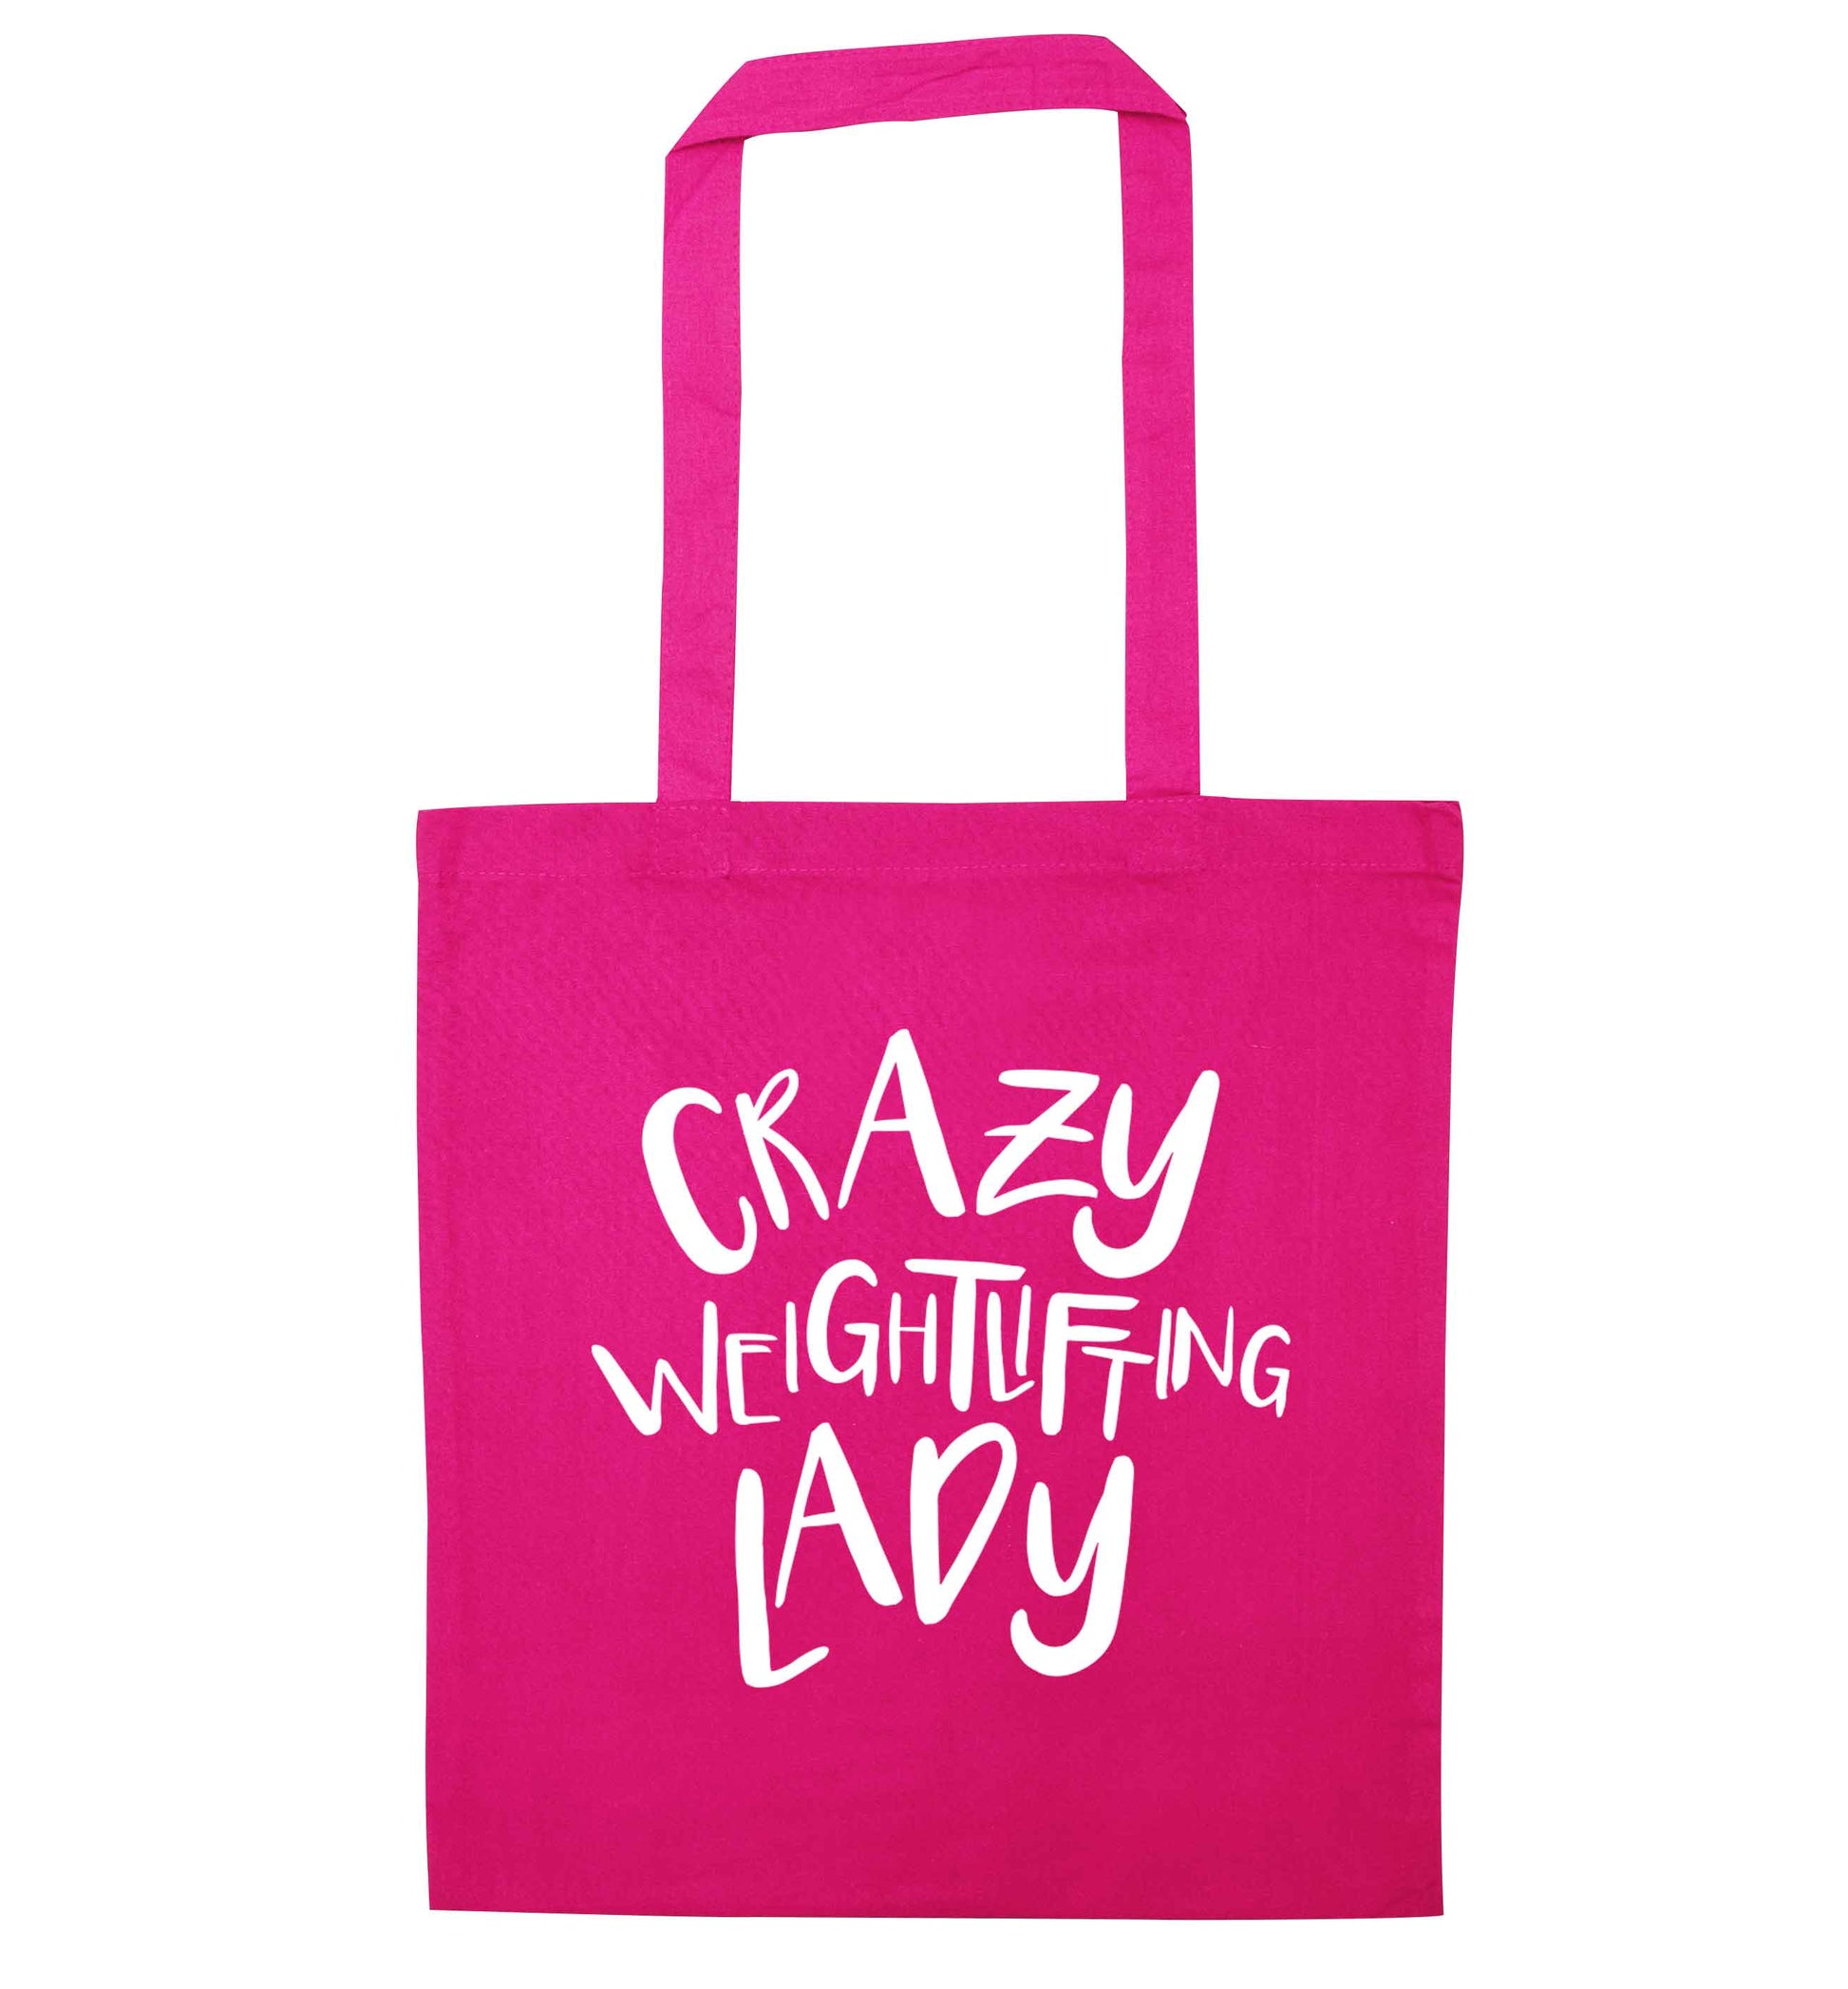 Crazy weightlifting lady pink tote bag